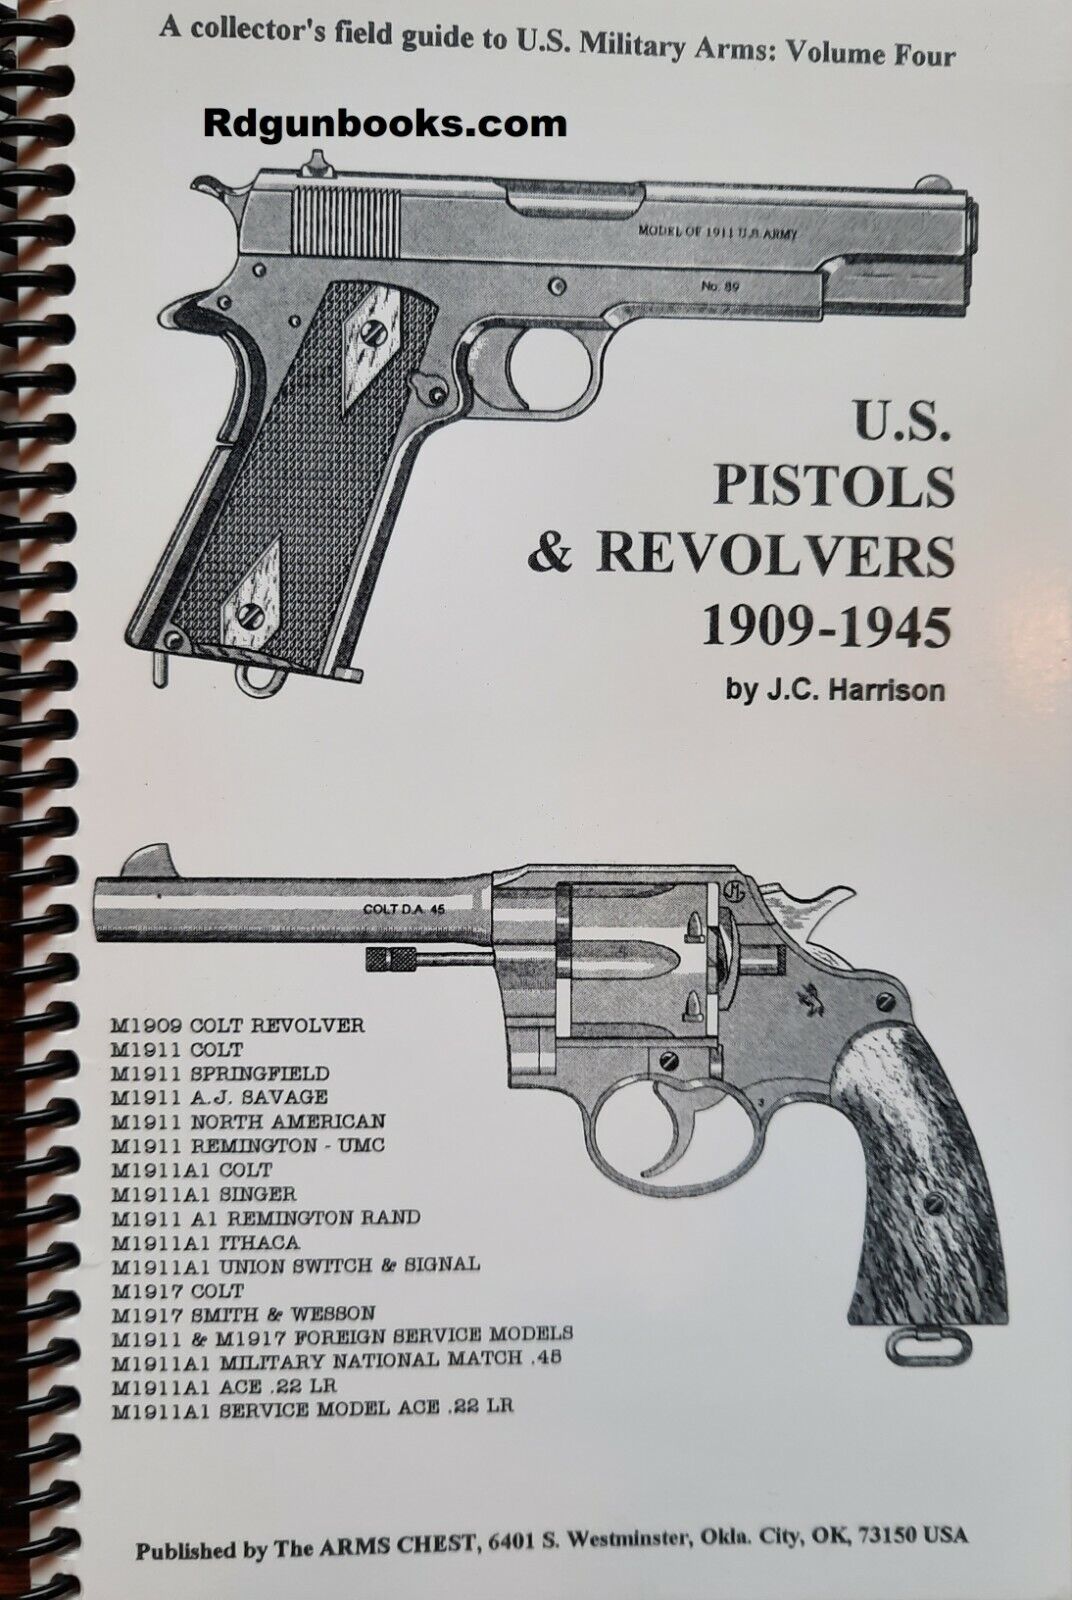 U.S. Pistols & Revolvers 1909 to 1945 by J. Harrison out of print TOP gun book